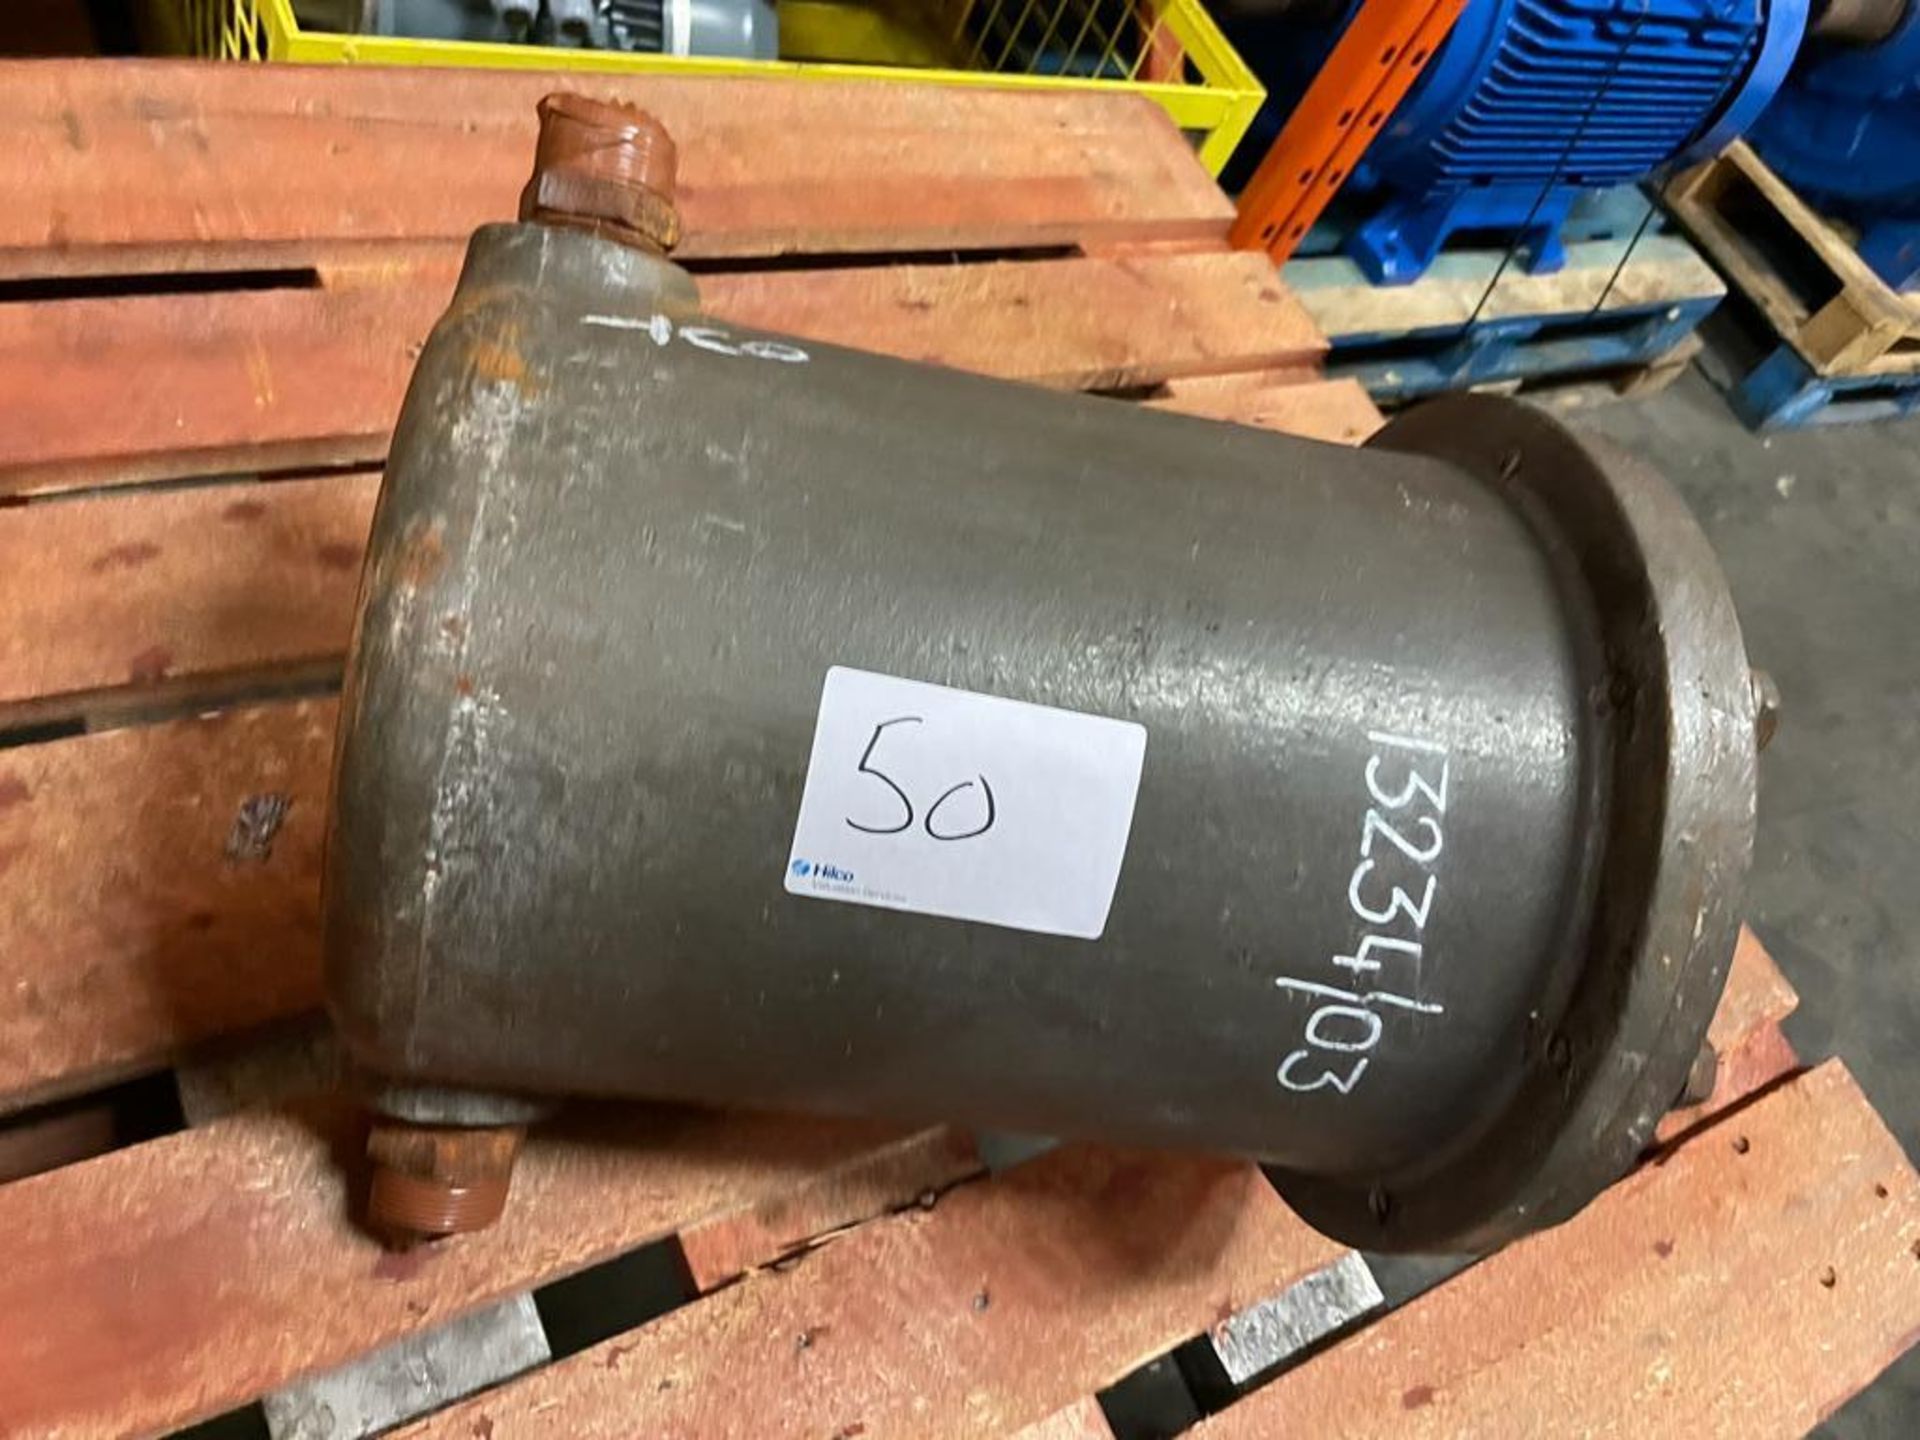 1 Pump Spirax Ogden Automatic 40 Psi With Check Valves 1.1/2 In. Part No 1323403 Location HS008C